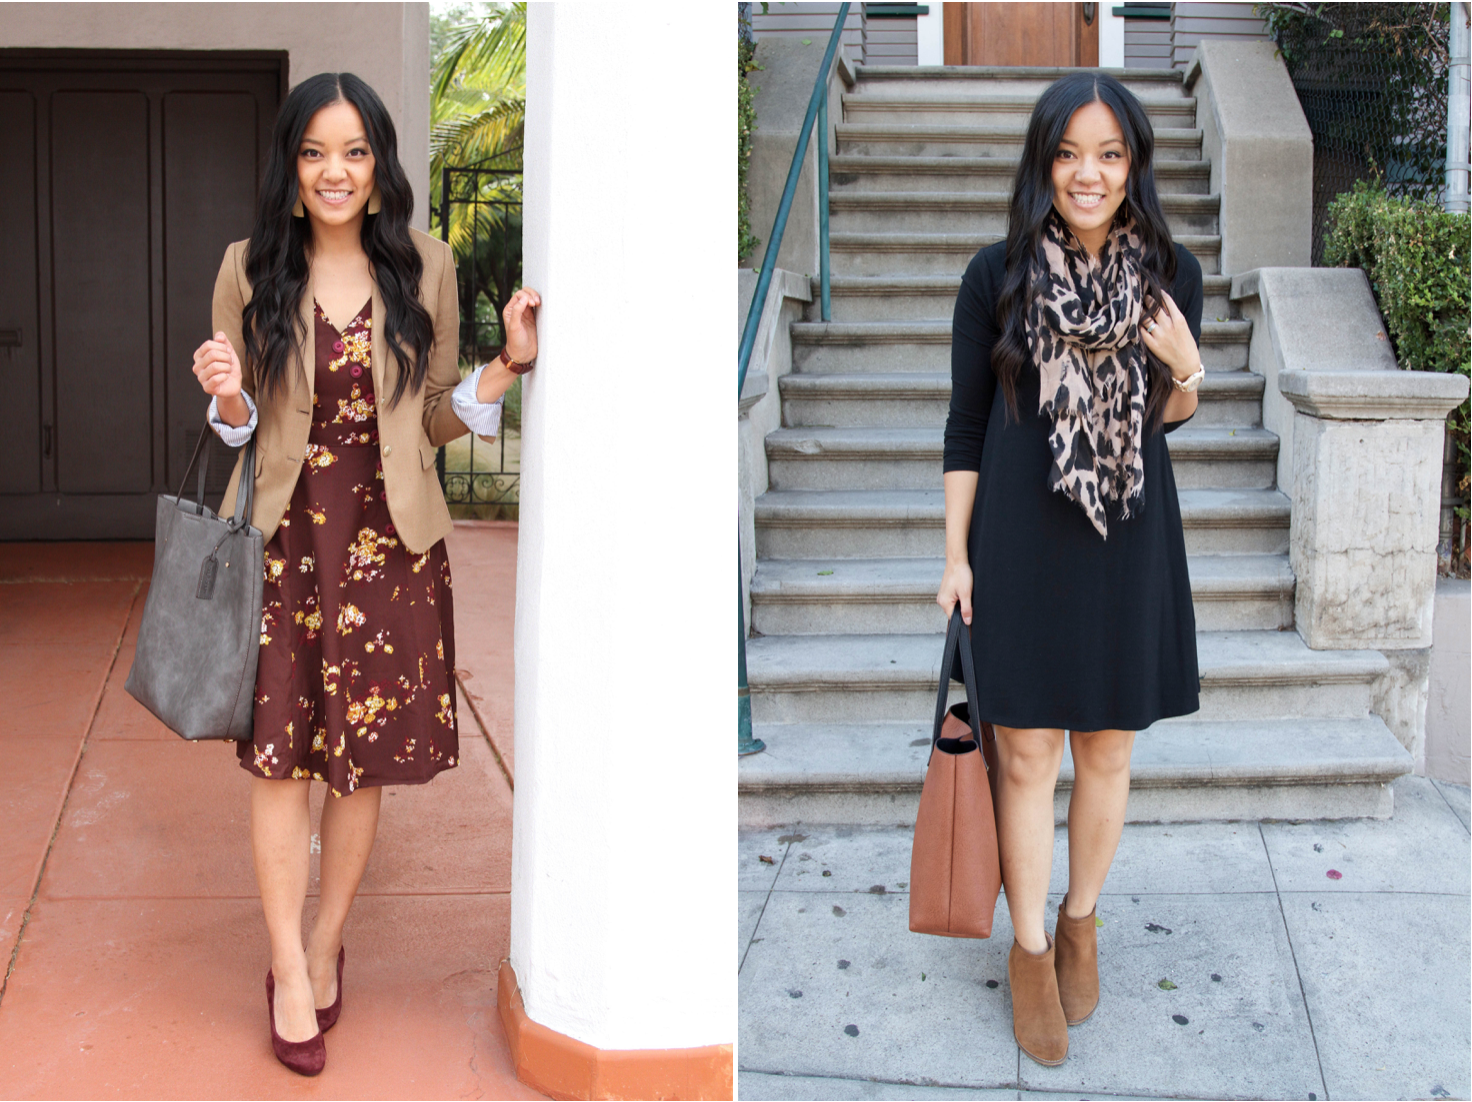 business casual dresses